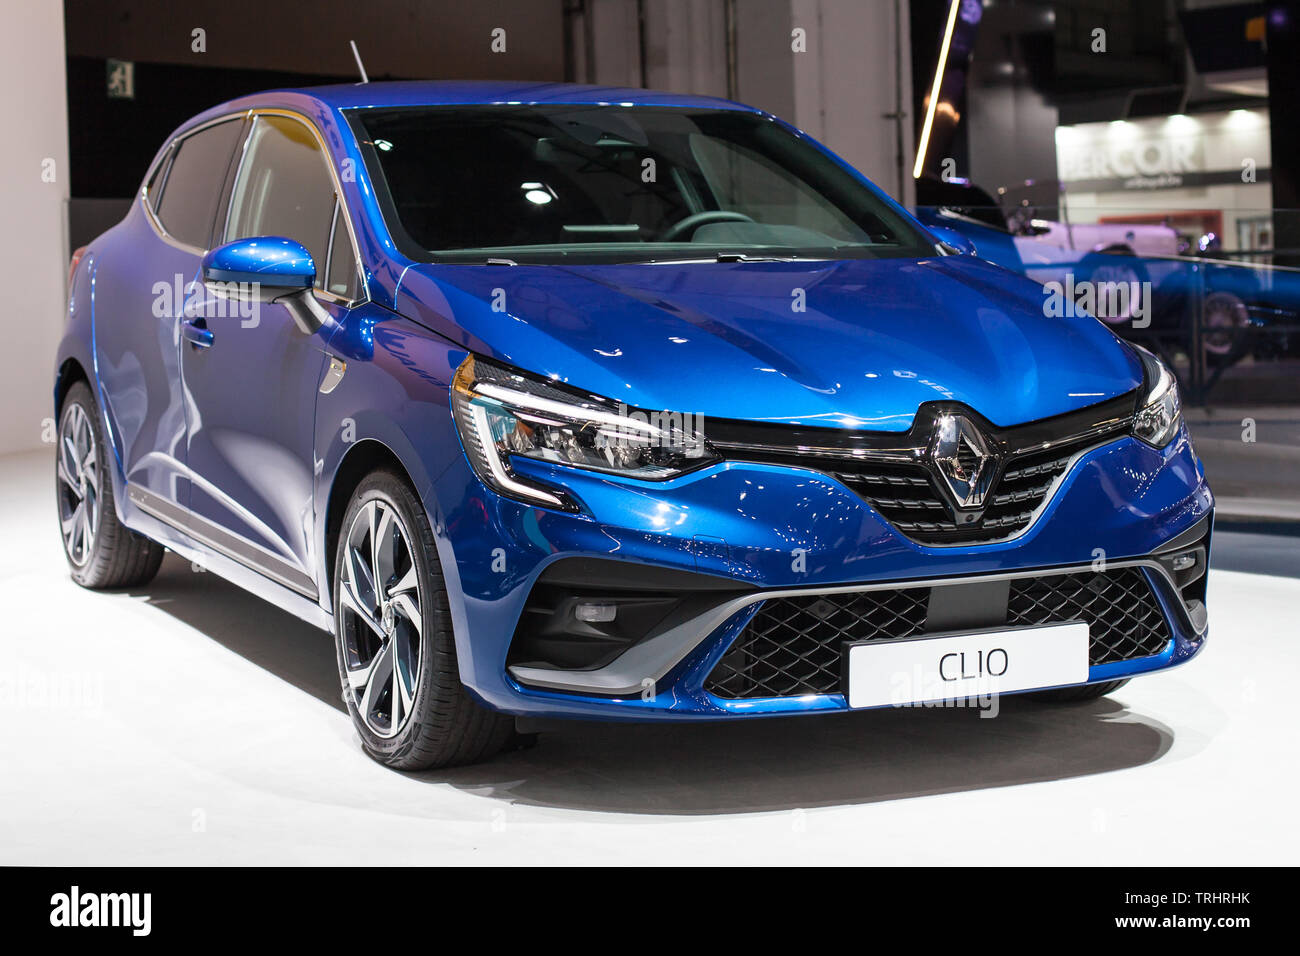 Barcelona, Spain - May 19, 2019: Renault Clio RS Line showcased at Automobile Barcelona 2019. Stock Photo